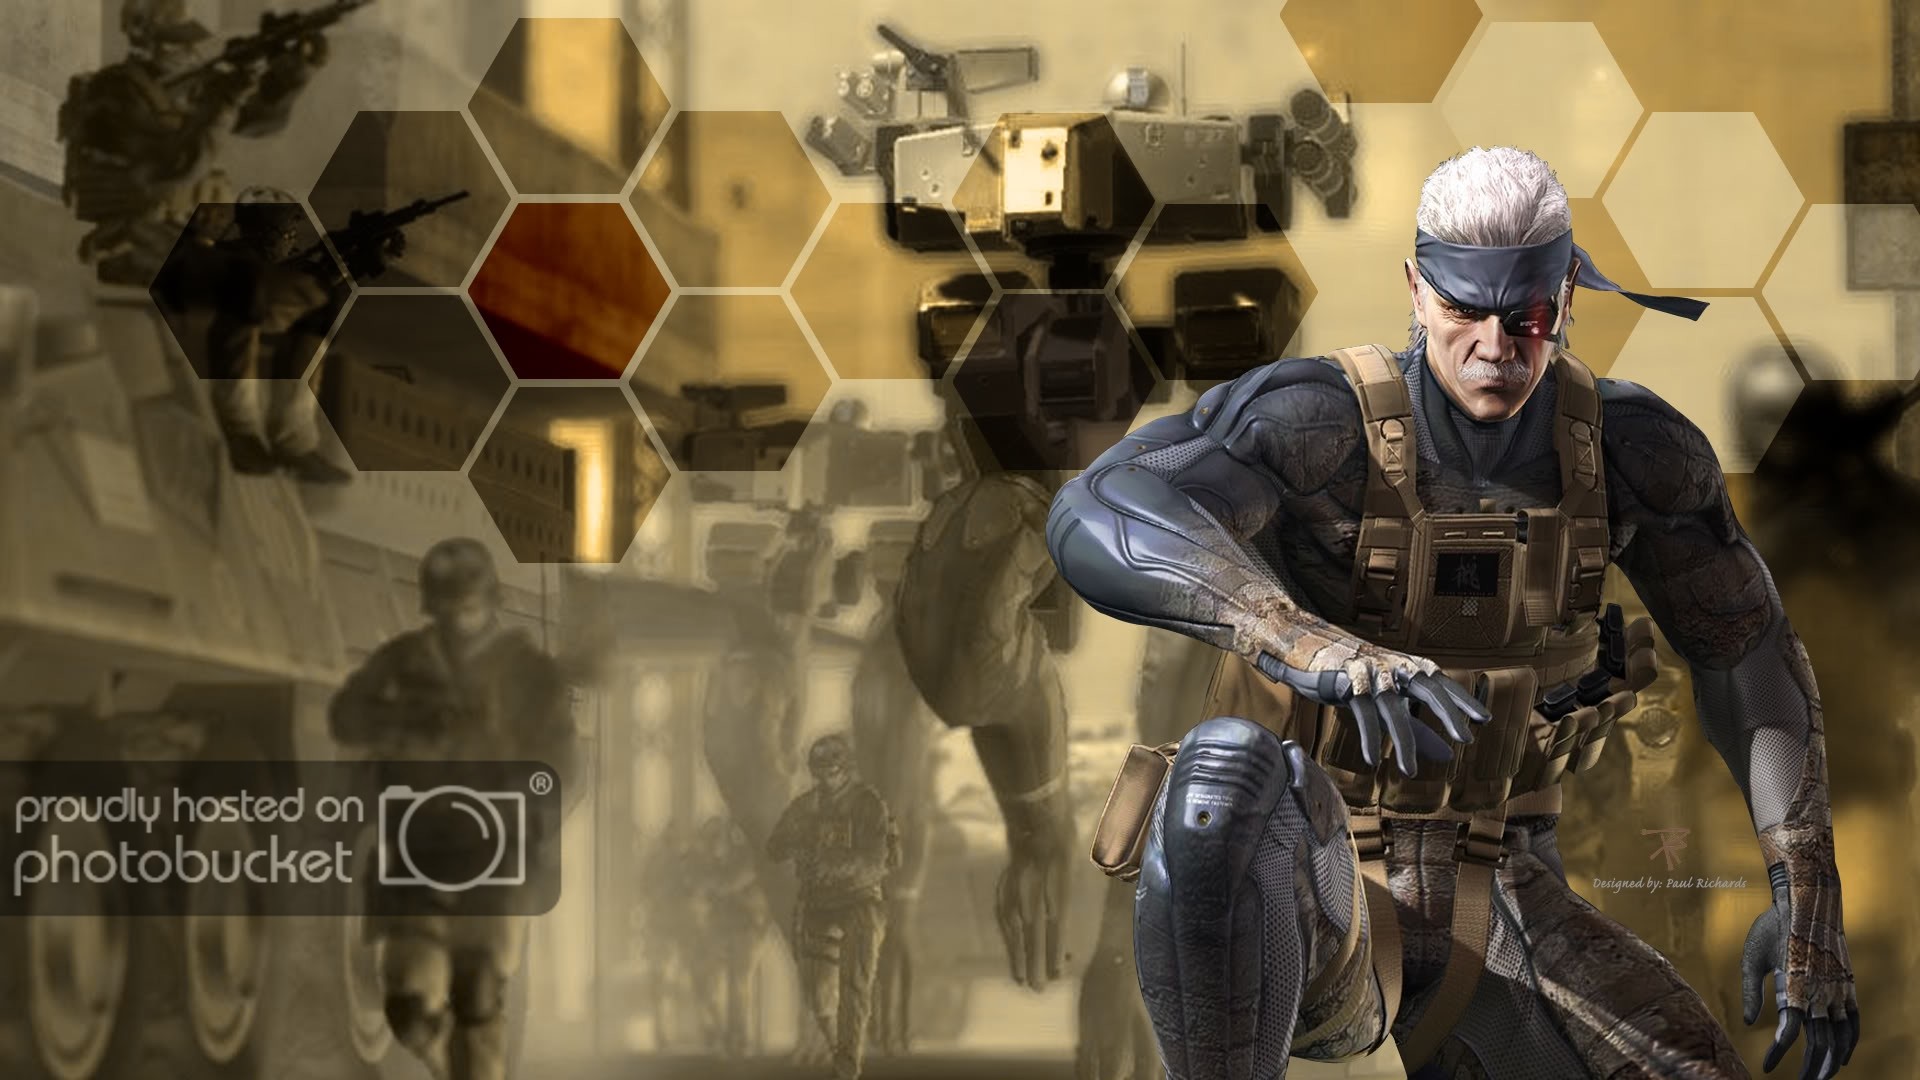 1920x1080 mgs, snake, background, metal gear solid, game, wallpapers wallpaper